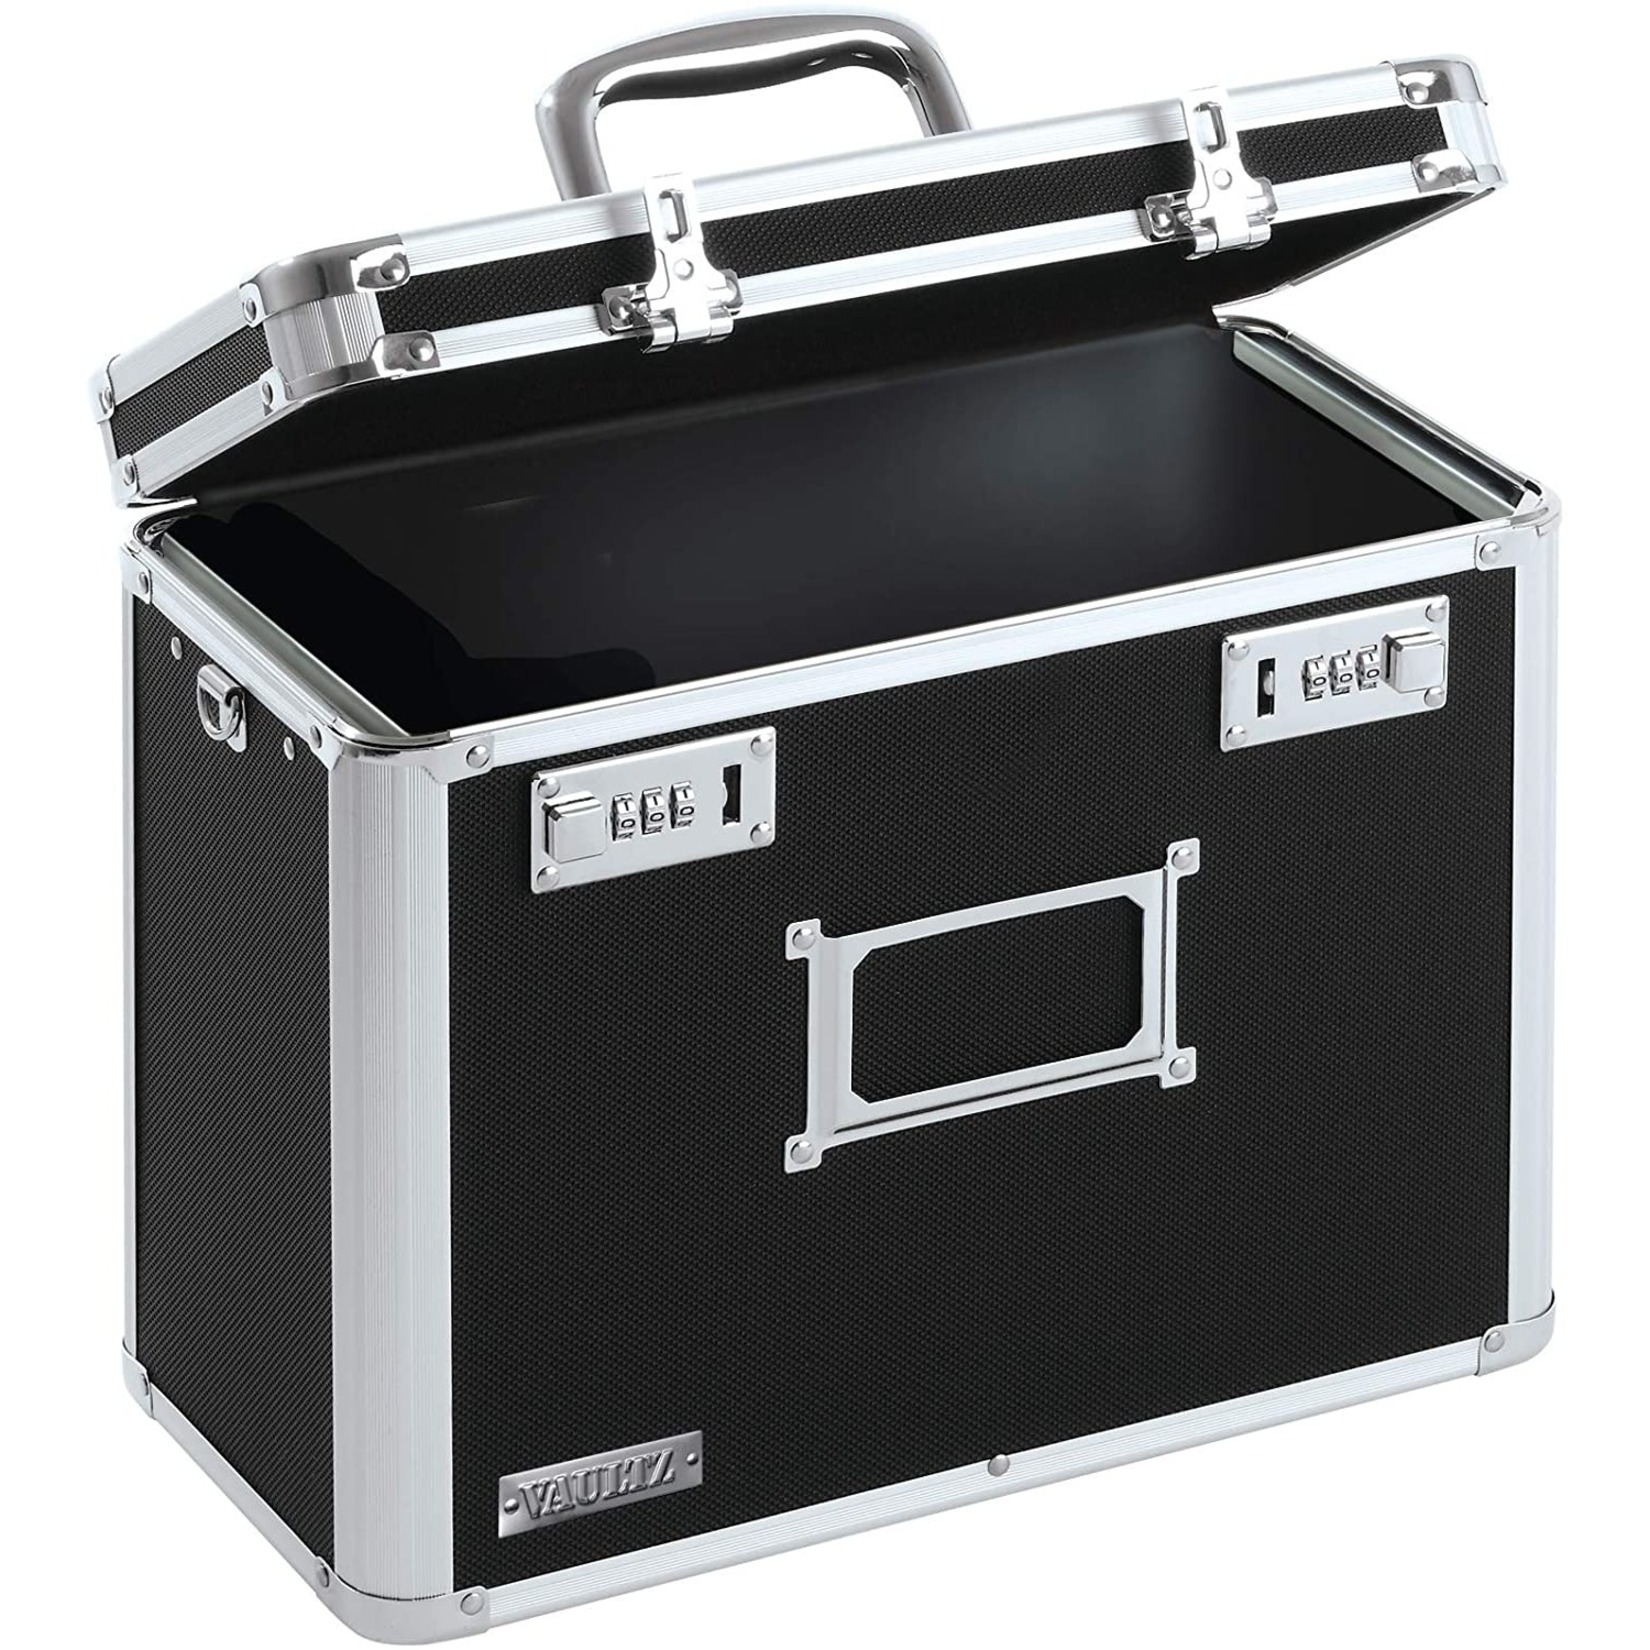 Locking File Boxes Chest Letter Files, 13.75" x 7.25" x 12.25", Black - image 1 of 3